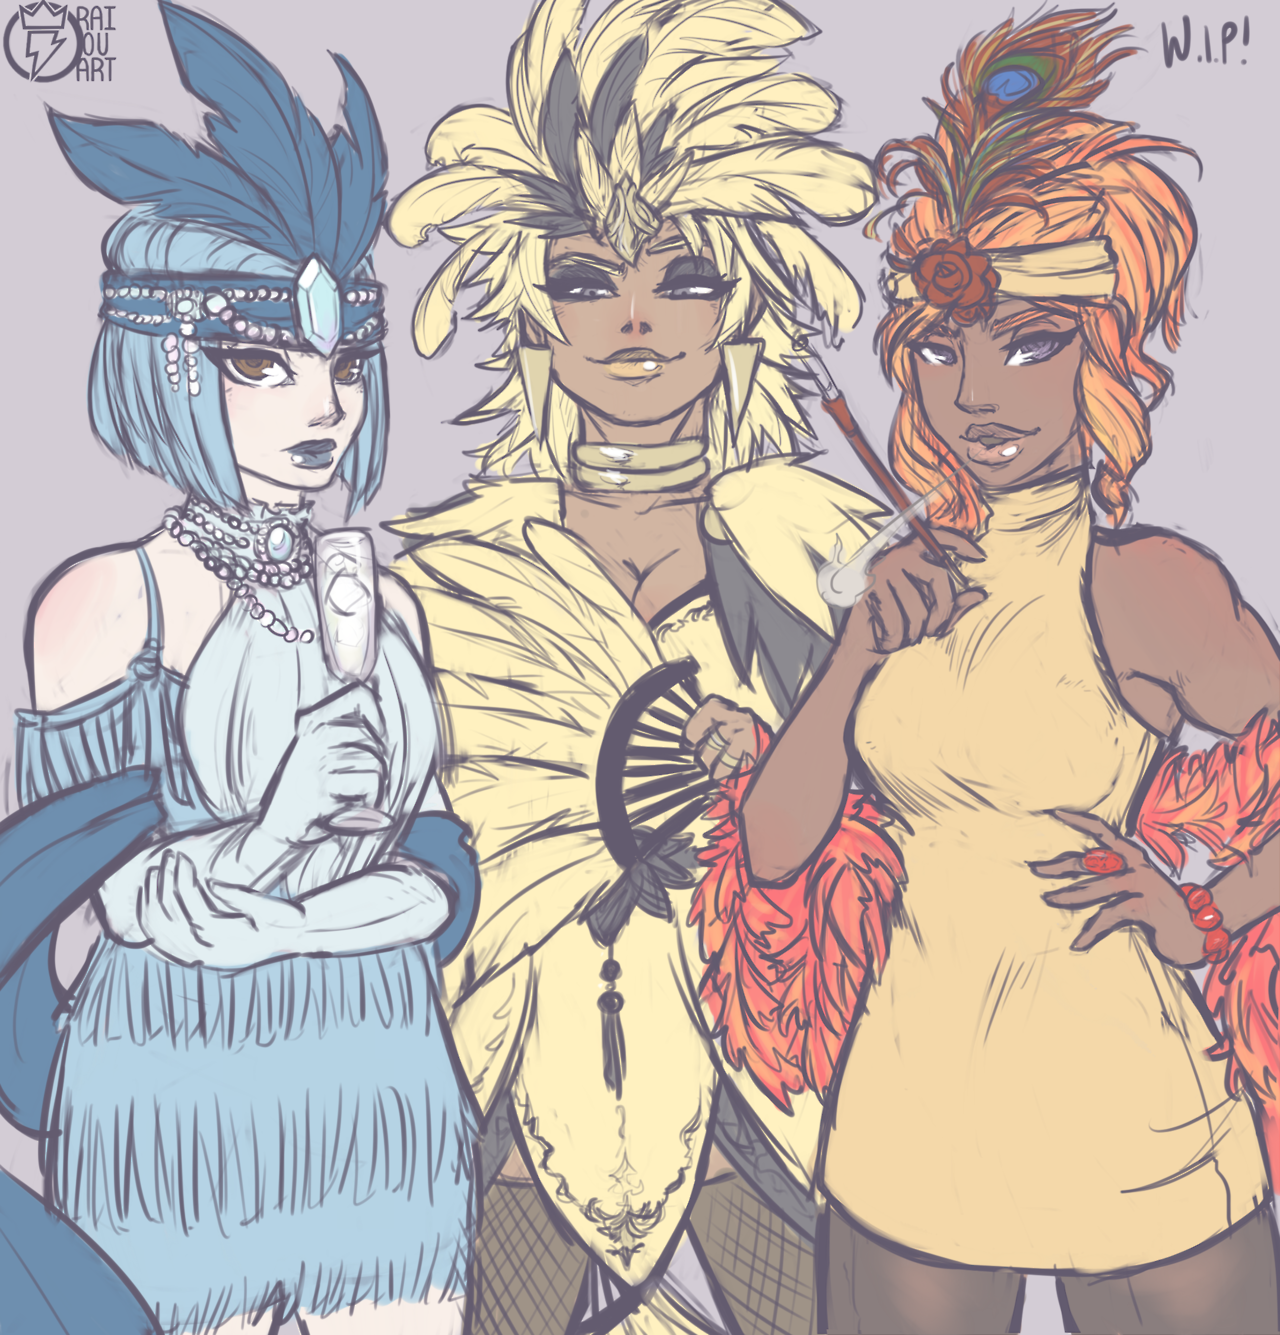 The legendary birds: Articuno, Moltres and Zapdos by LookDem on DeviantArt